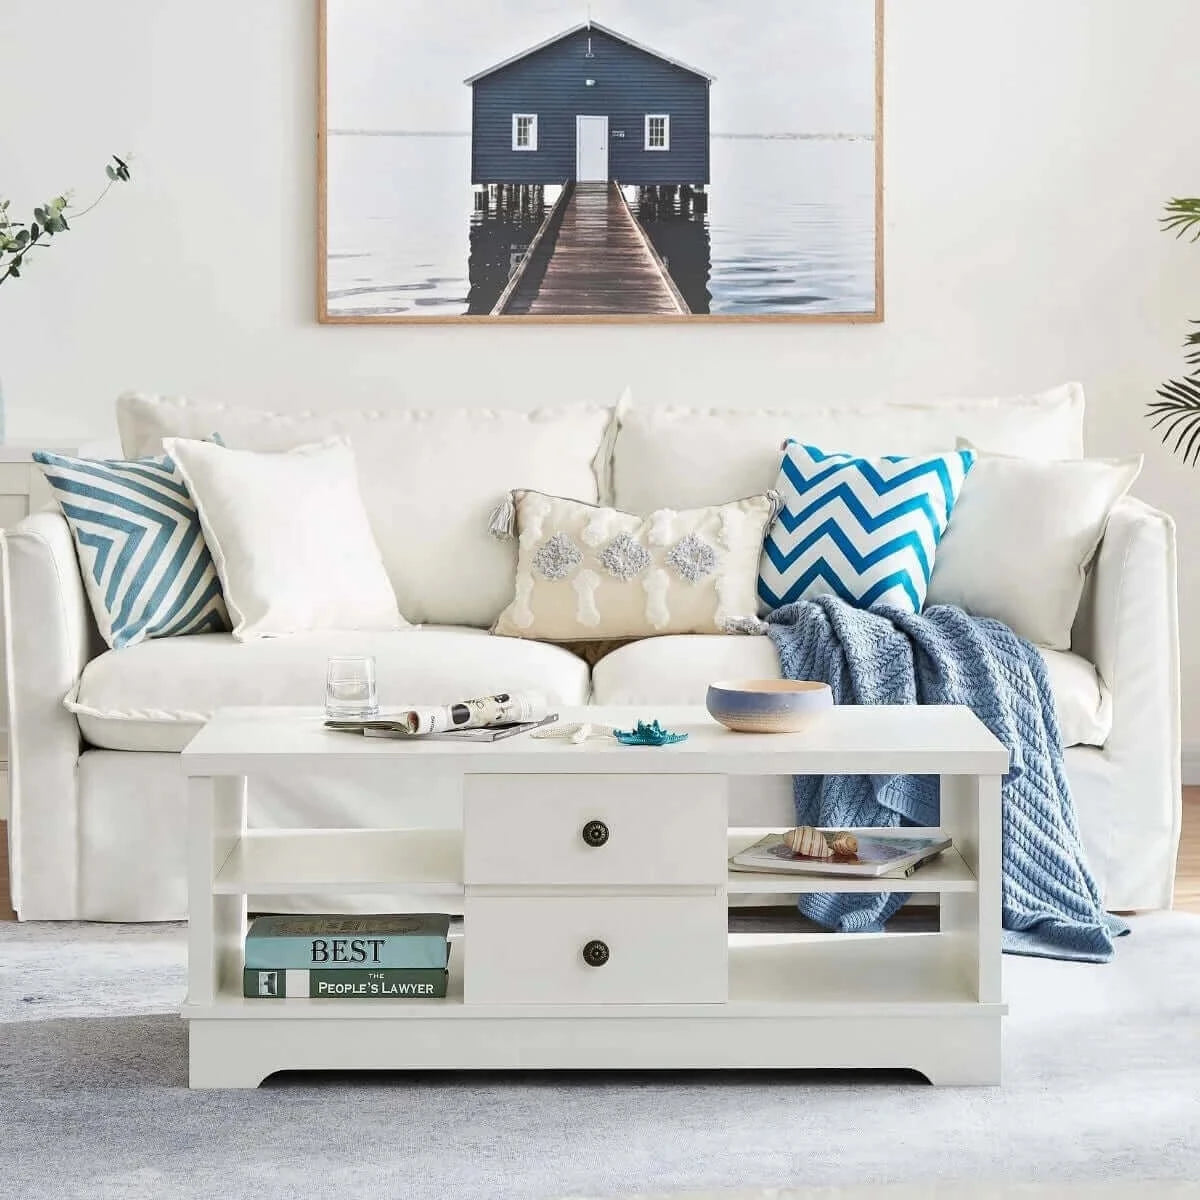 Buy margaux white coastal style coffee table with drawers - upinteriors-Upinteriors